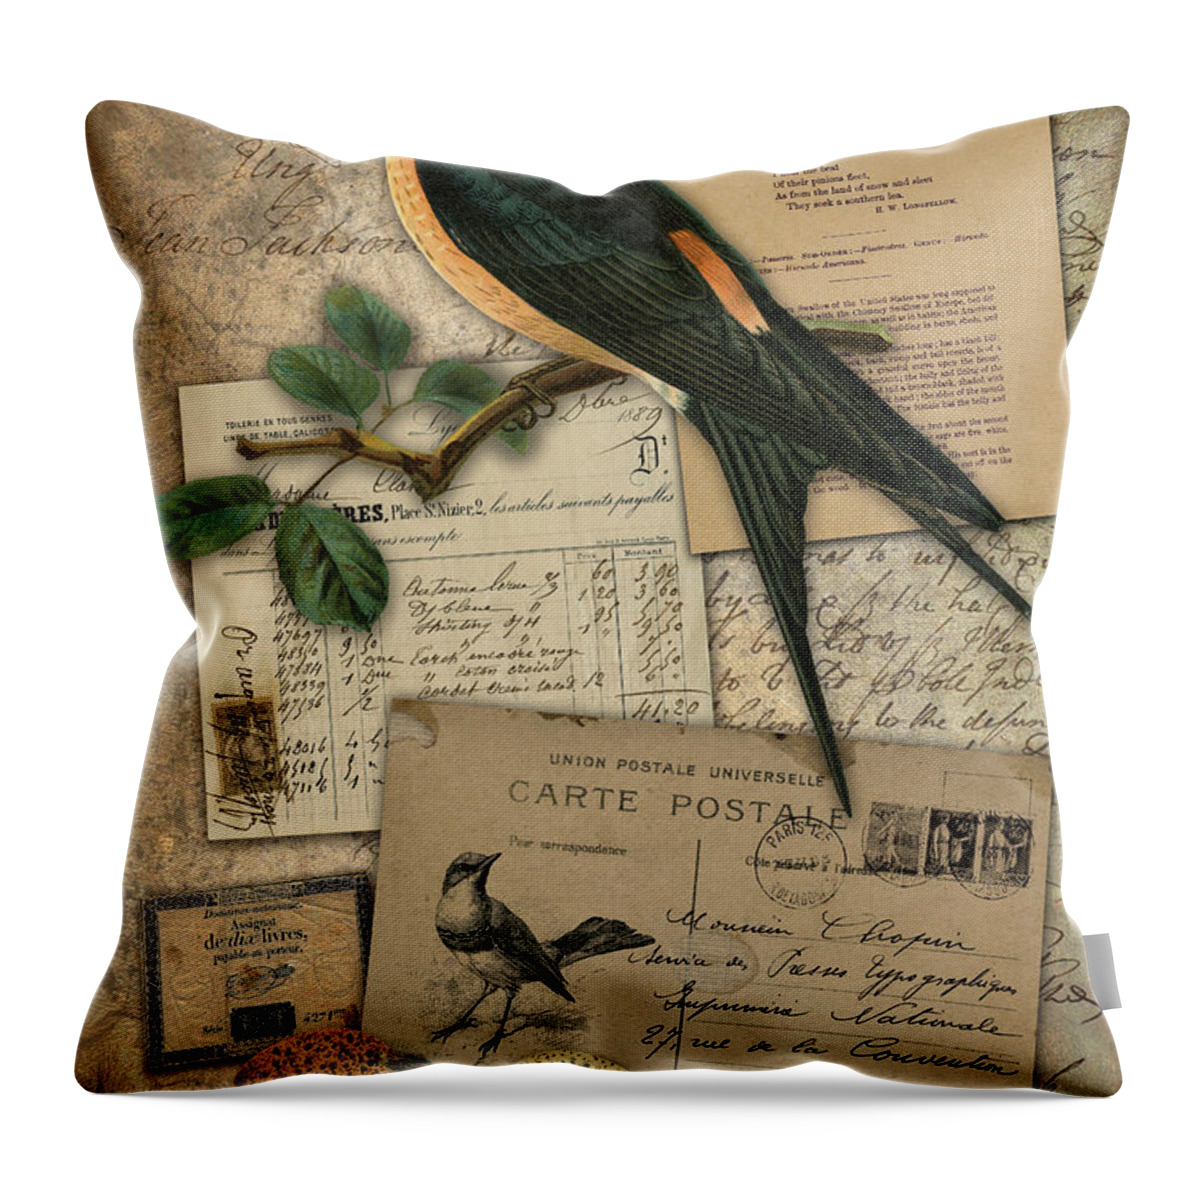  Throw Pillow featuring the digital art The Barn Swallow by Terry Kirkland Cook